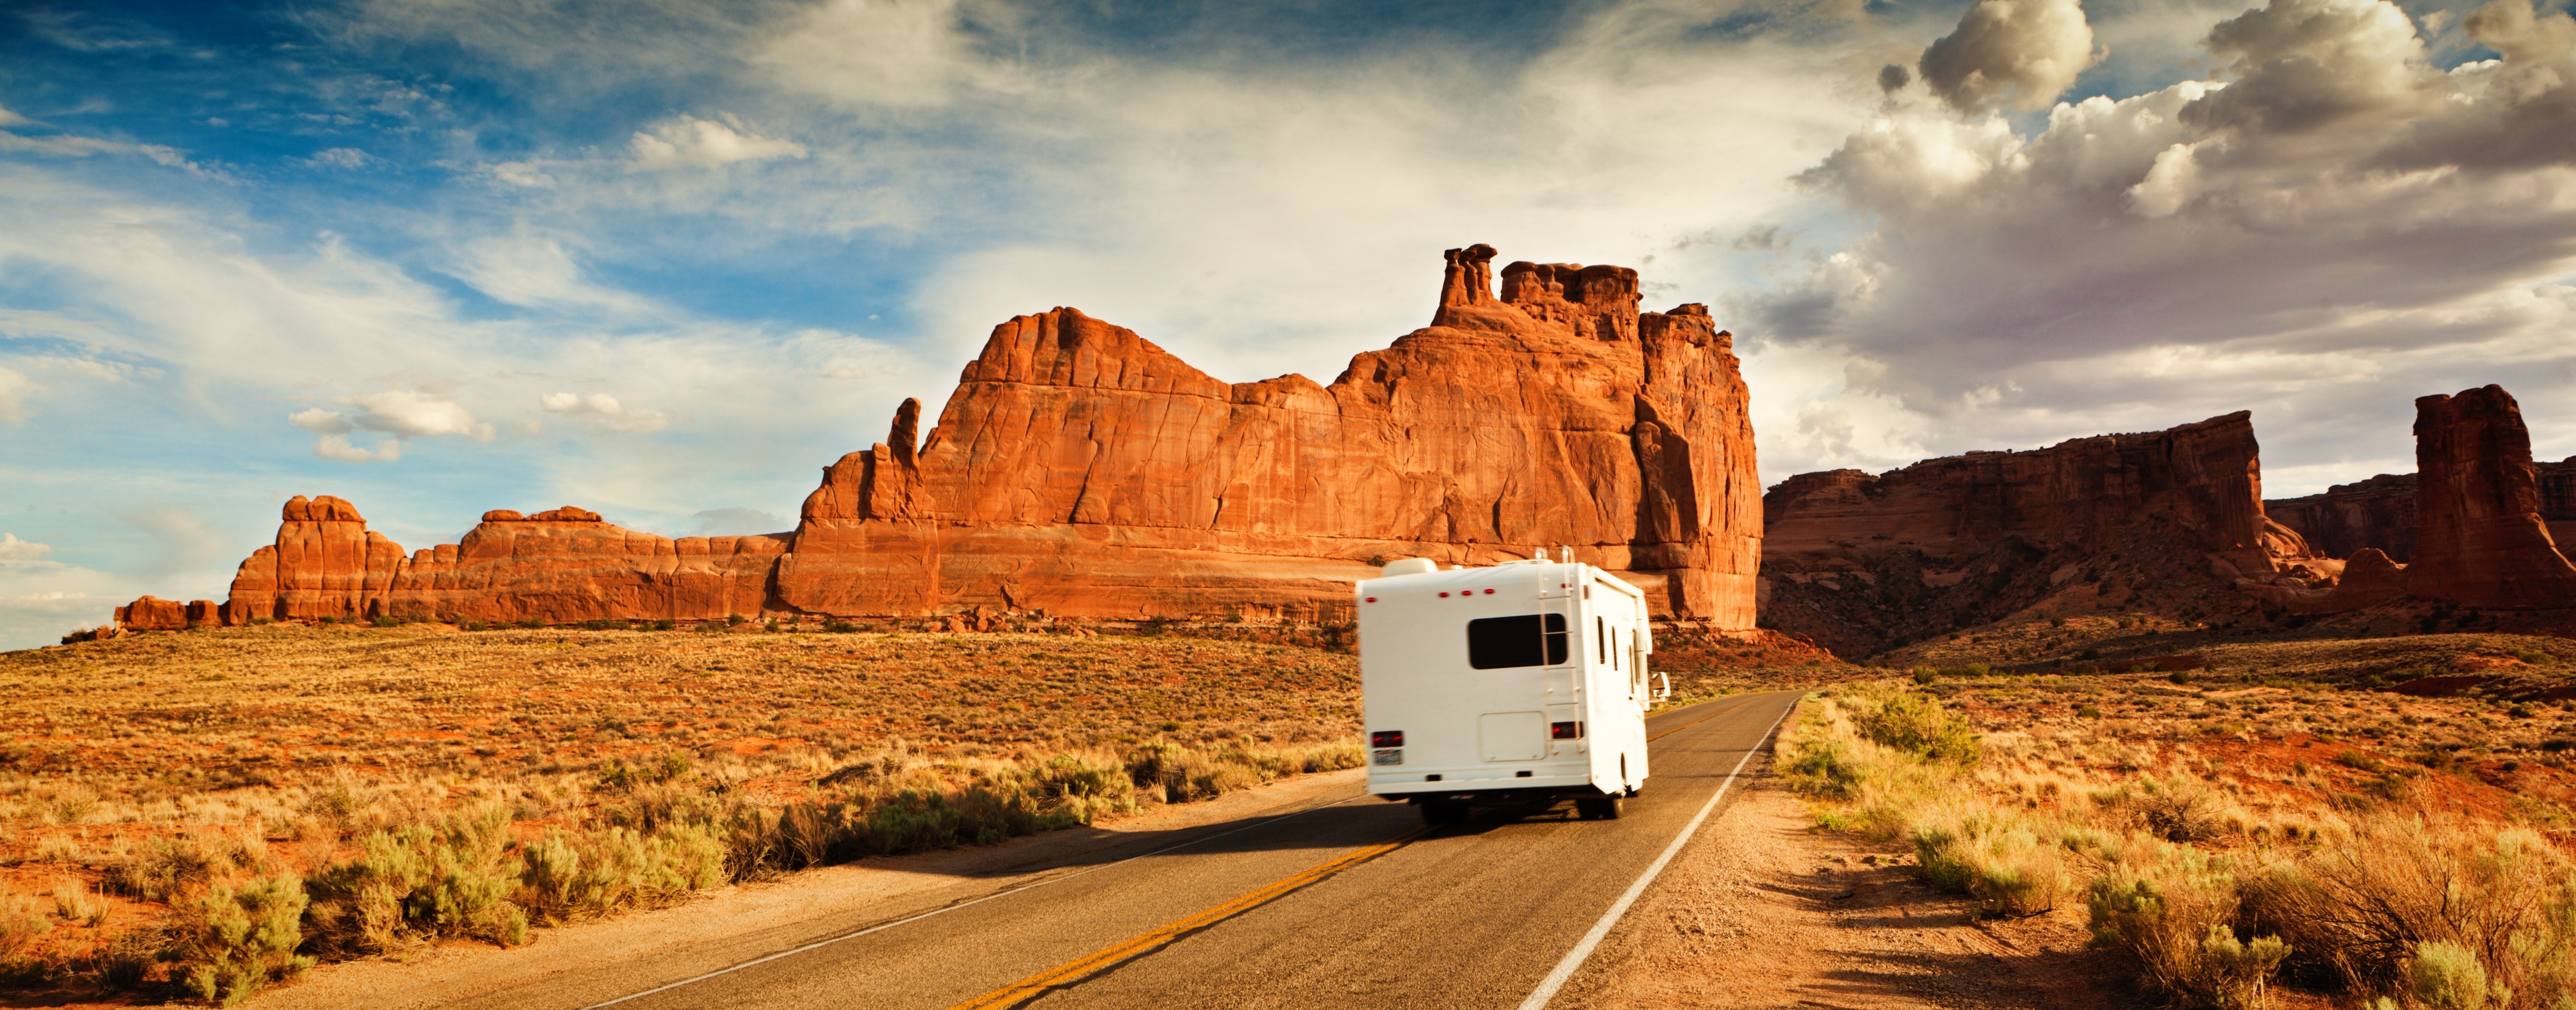 RV Travel Tips: How to Prepare for an RV Vacation